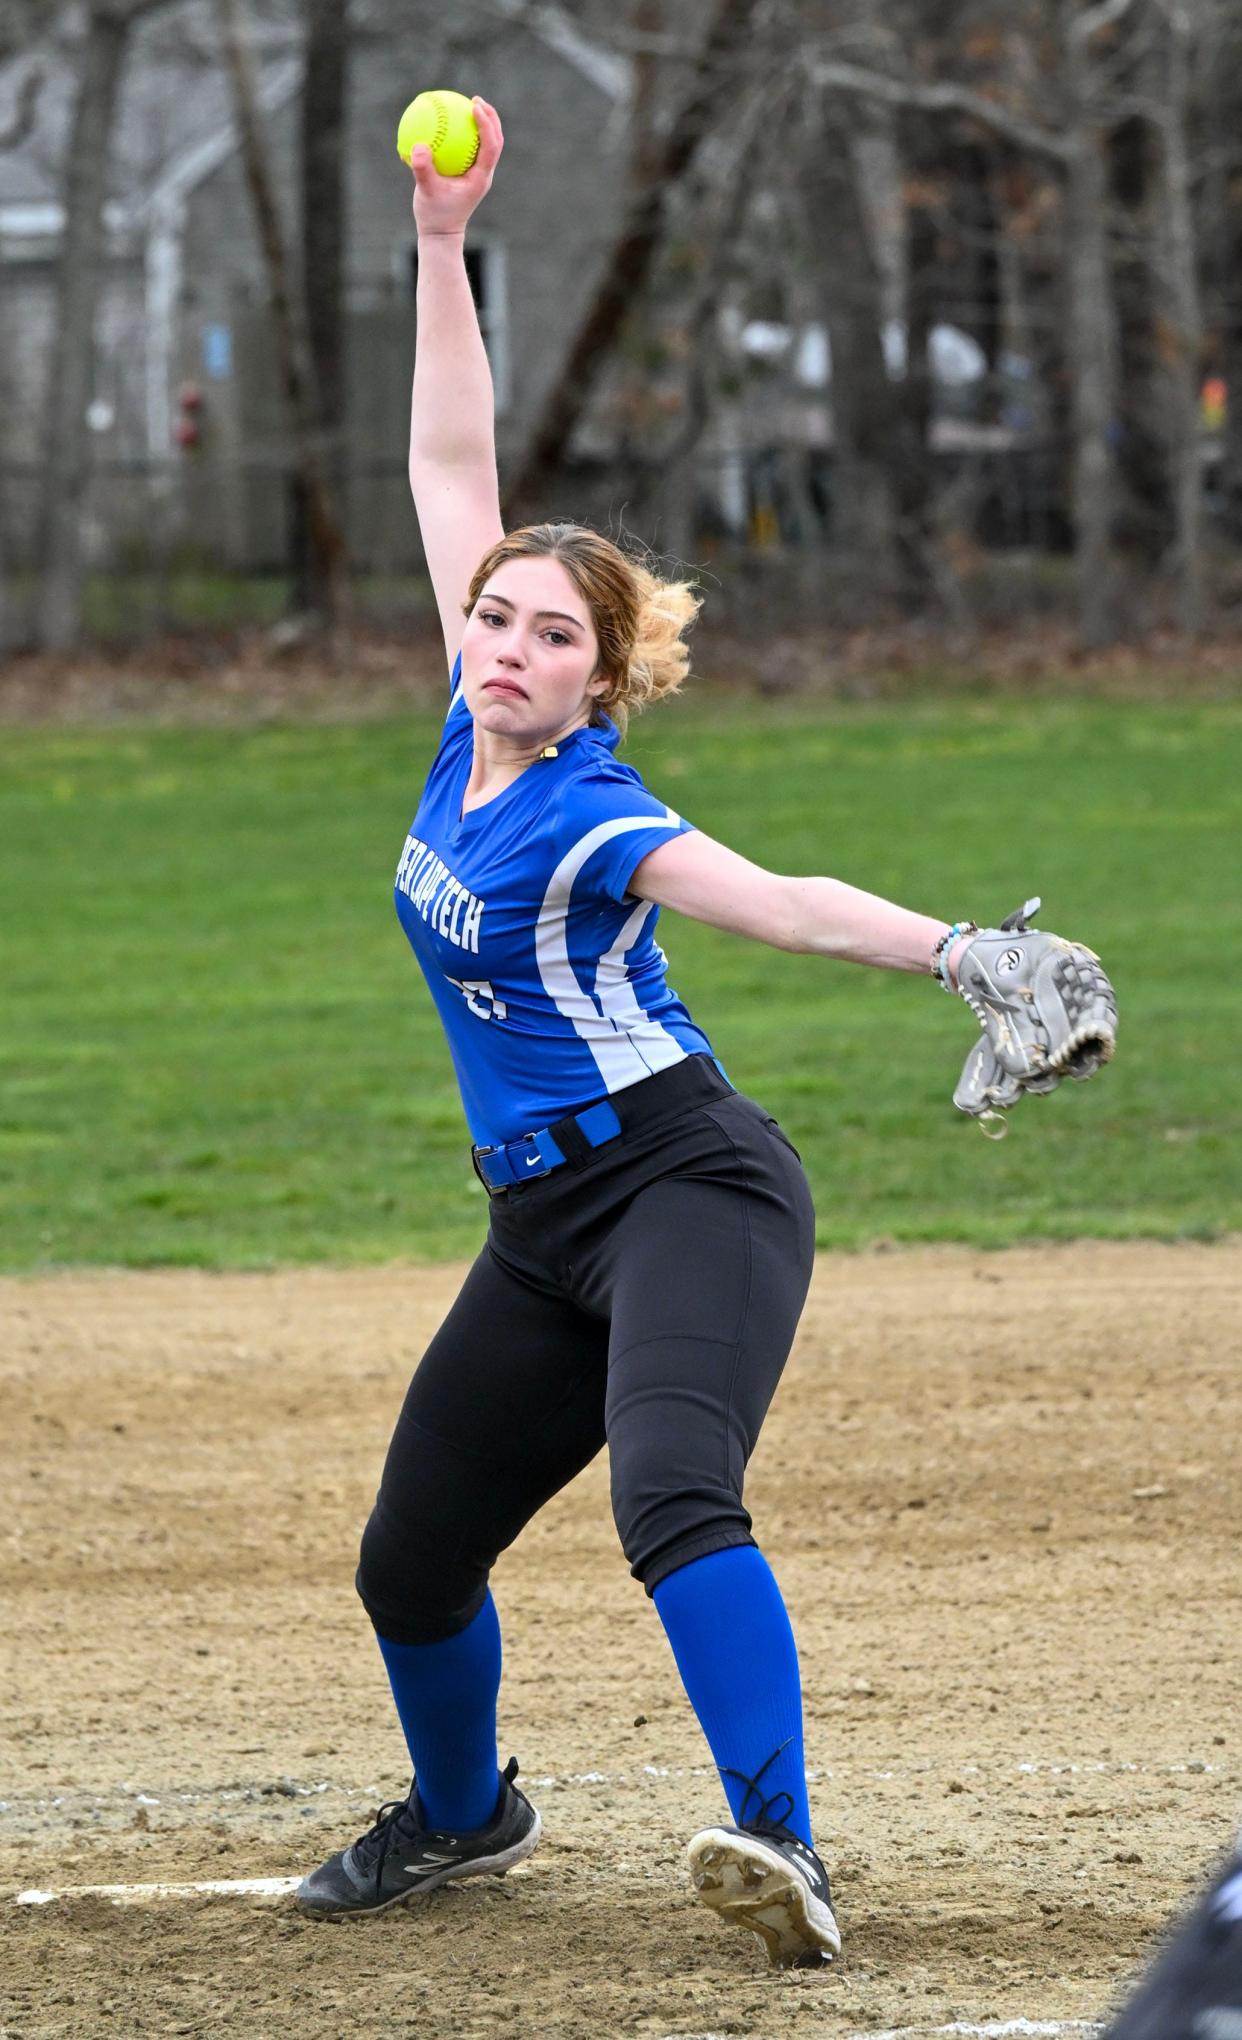 NORTH EASTHAM 04/05/24 Upper Cape Tech pitcher Taysia Lopes delivers against Nauset. softball
Ron Schloerb/Cape Cod Times